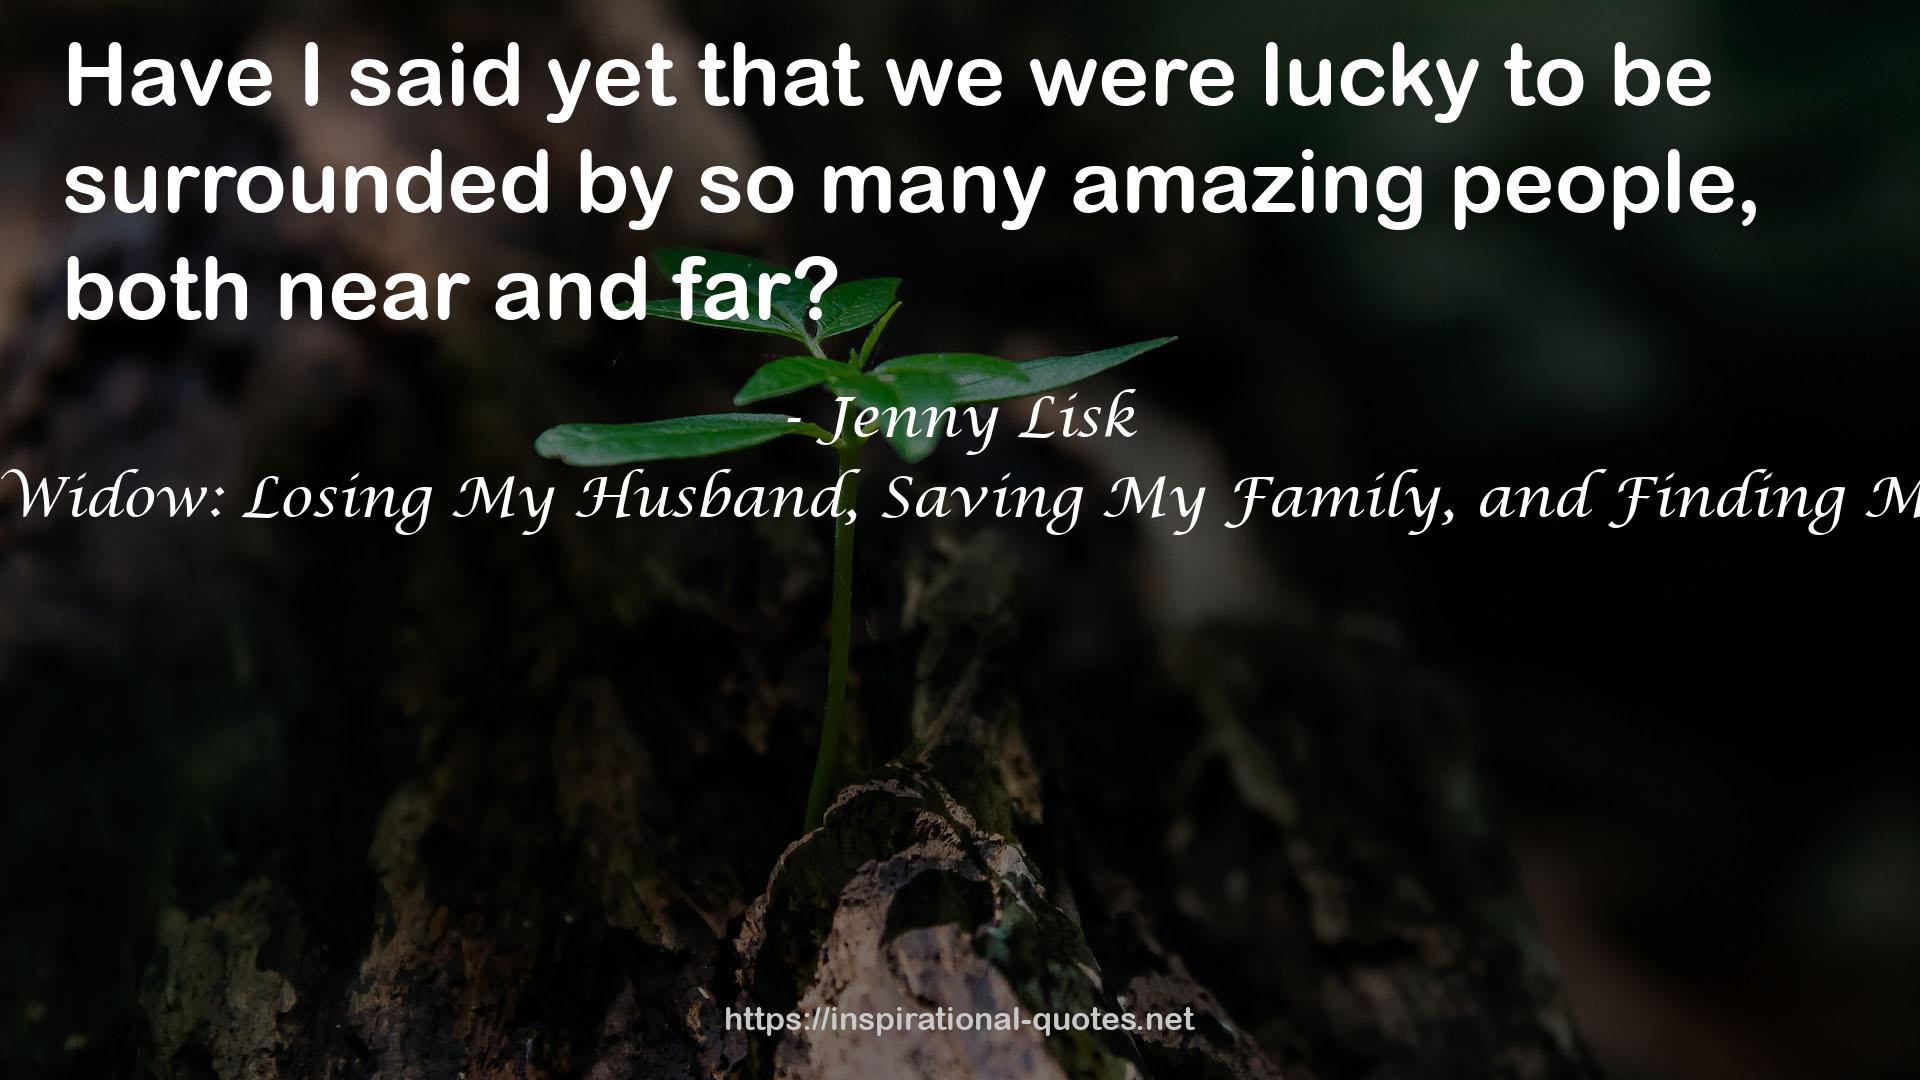 Jenny Lisk QUOTES